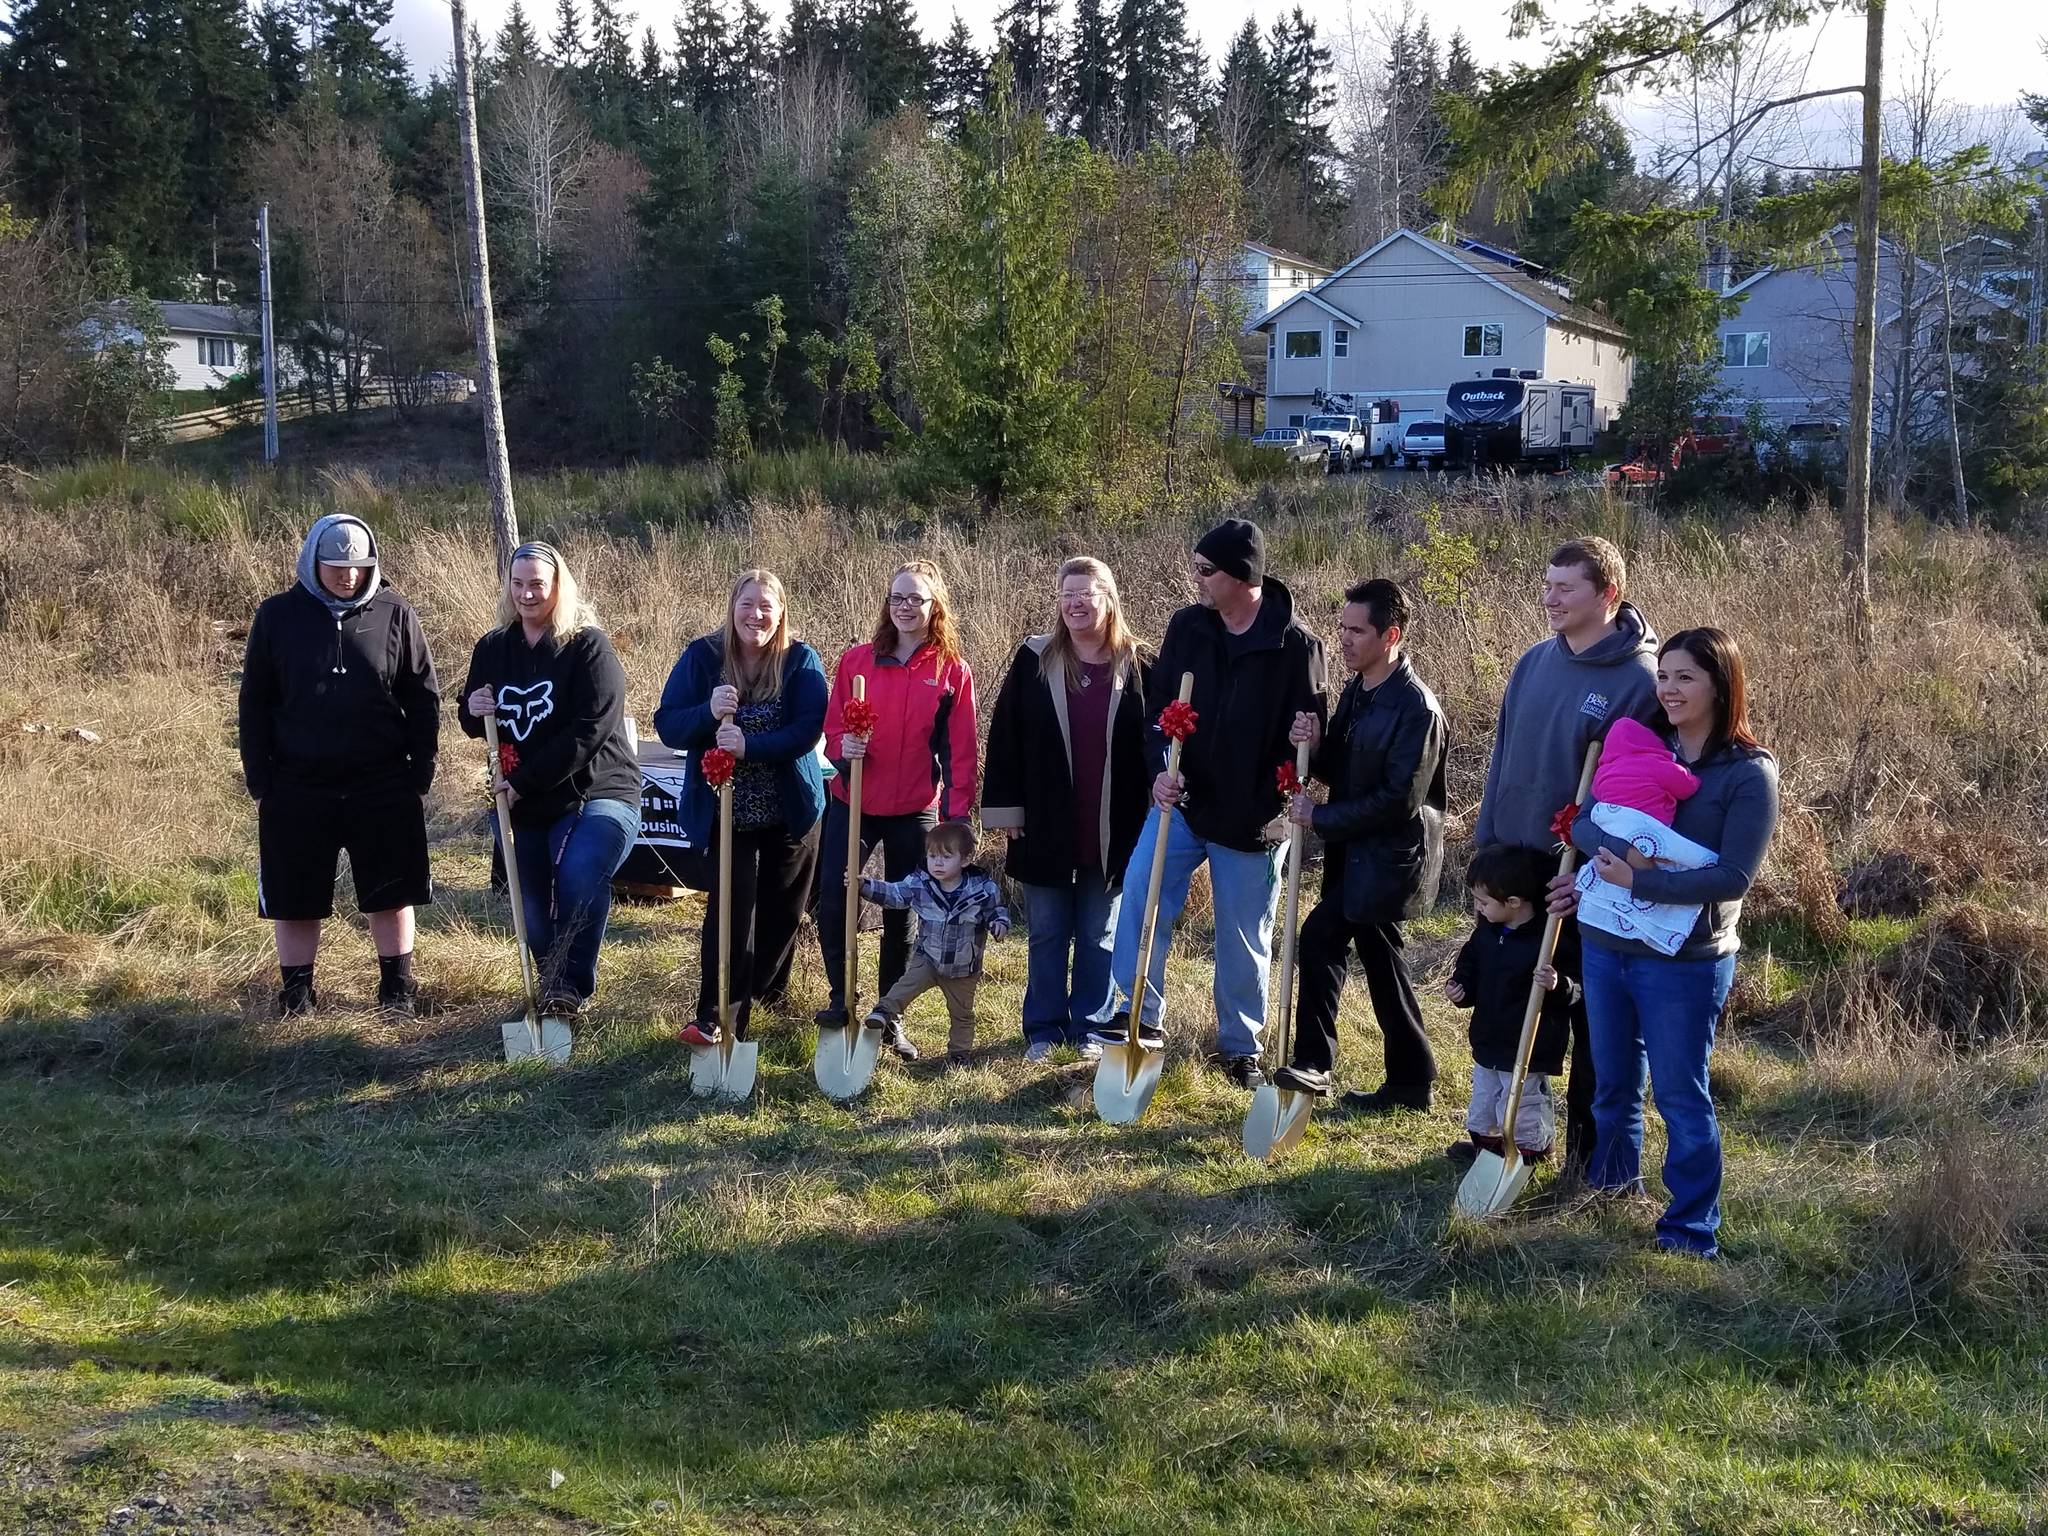 Families who broke ground for their homes at Cedarglen Terrace I are, from left, Lucas Meyer and Ann Rider; Betsy Fullerton; Chaleena Simmons, with her son doing the shoveling; Christy and Bret Niles; Francisco Gloria; and Ryan Heskett and Breana Lovik with their son and daughter.